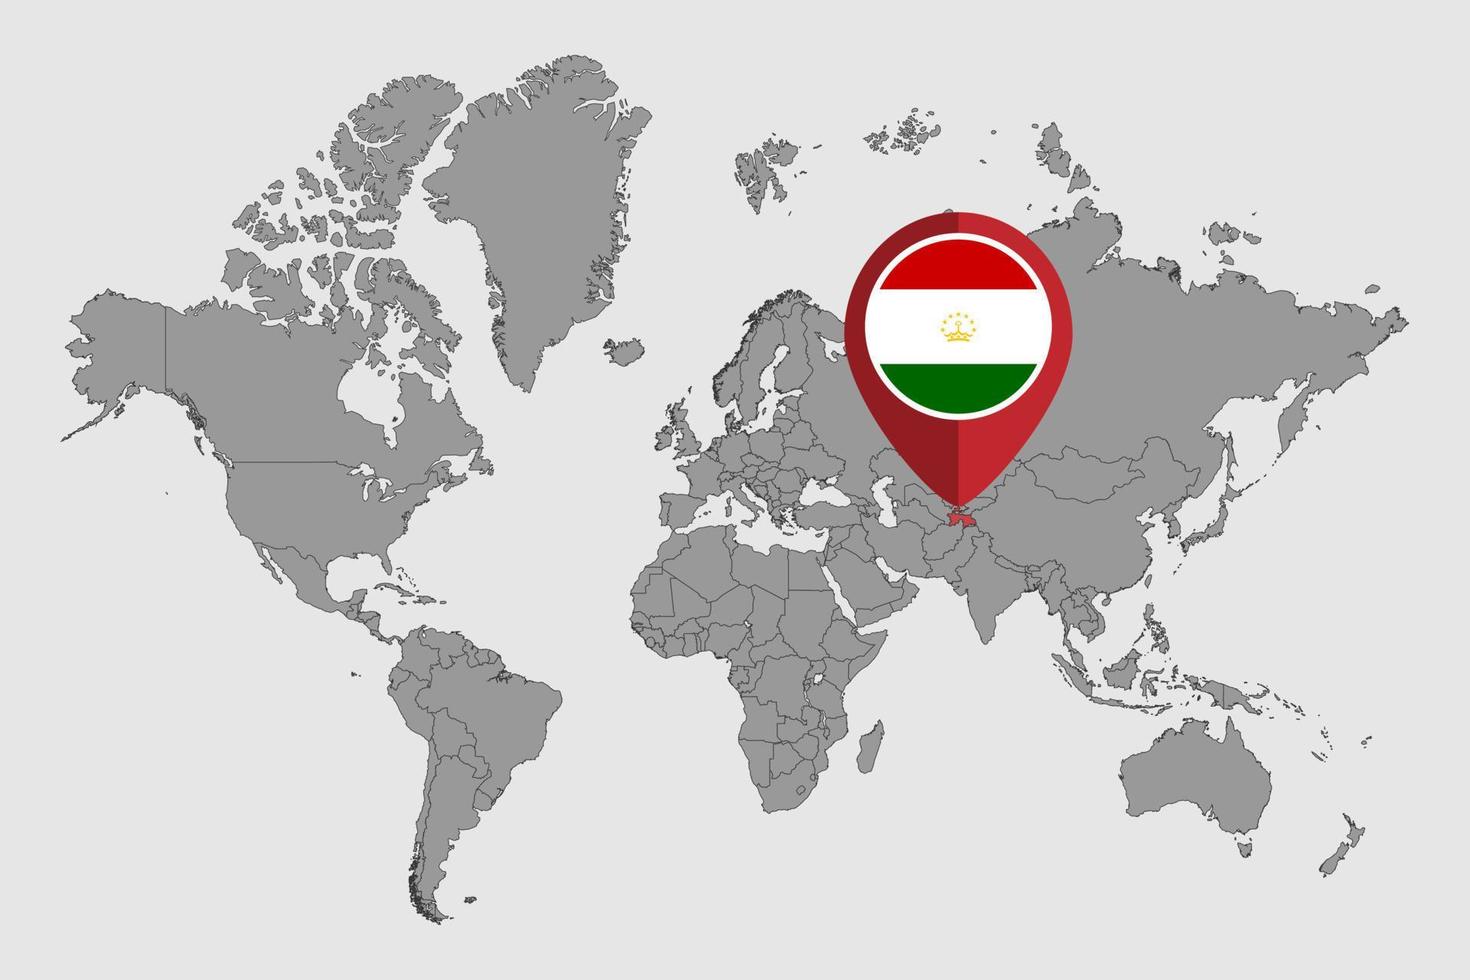 Pin map with Tajikistan flag on world map. Vector illustration.